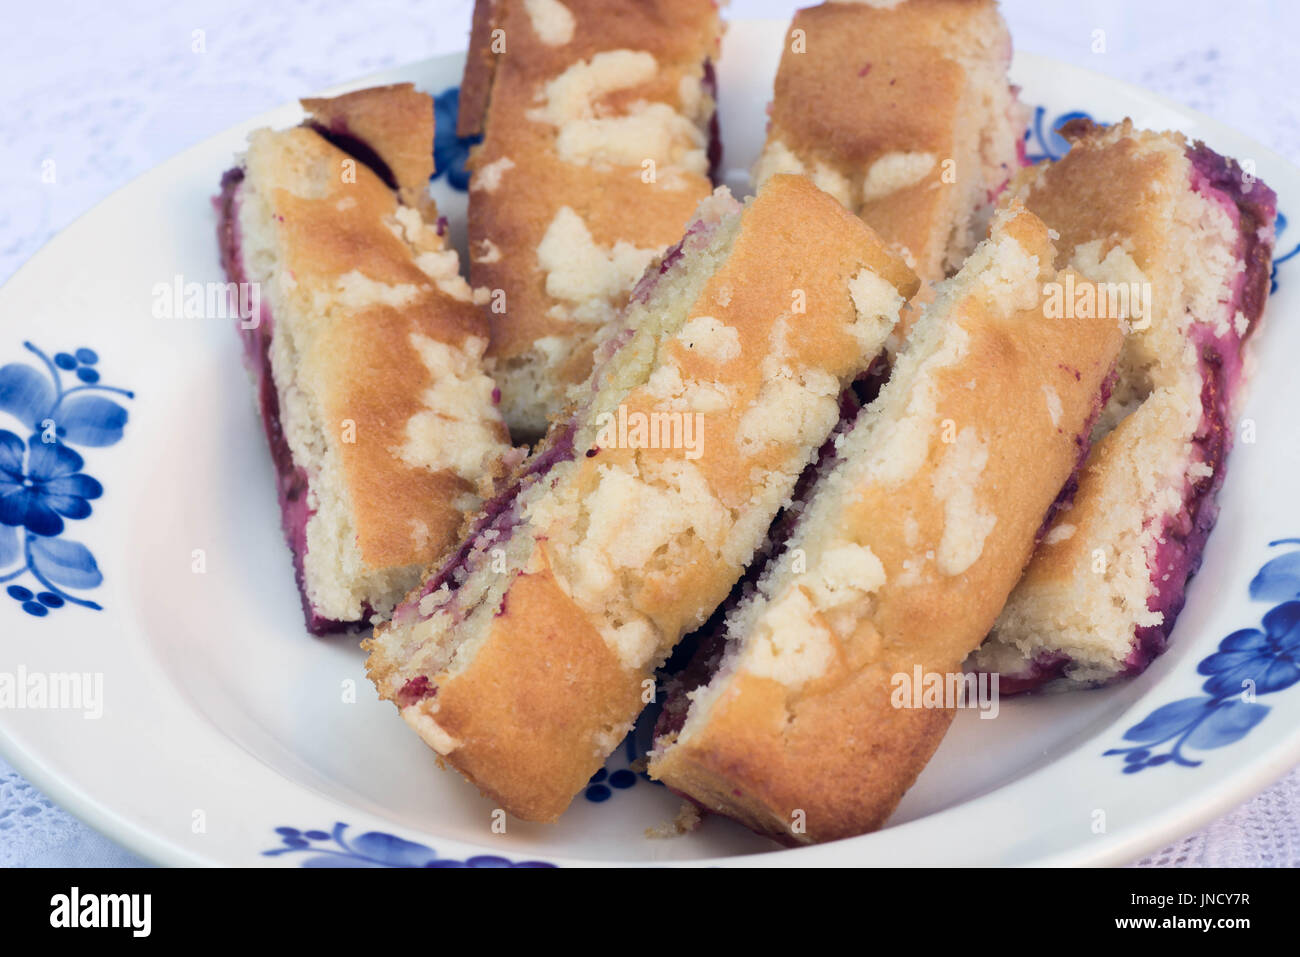 yeast cake with plums on plate Stock Photo